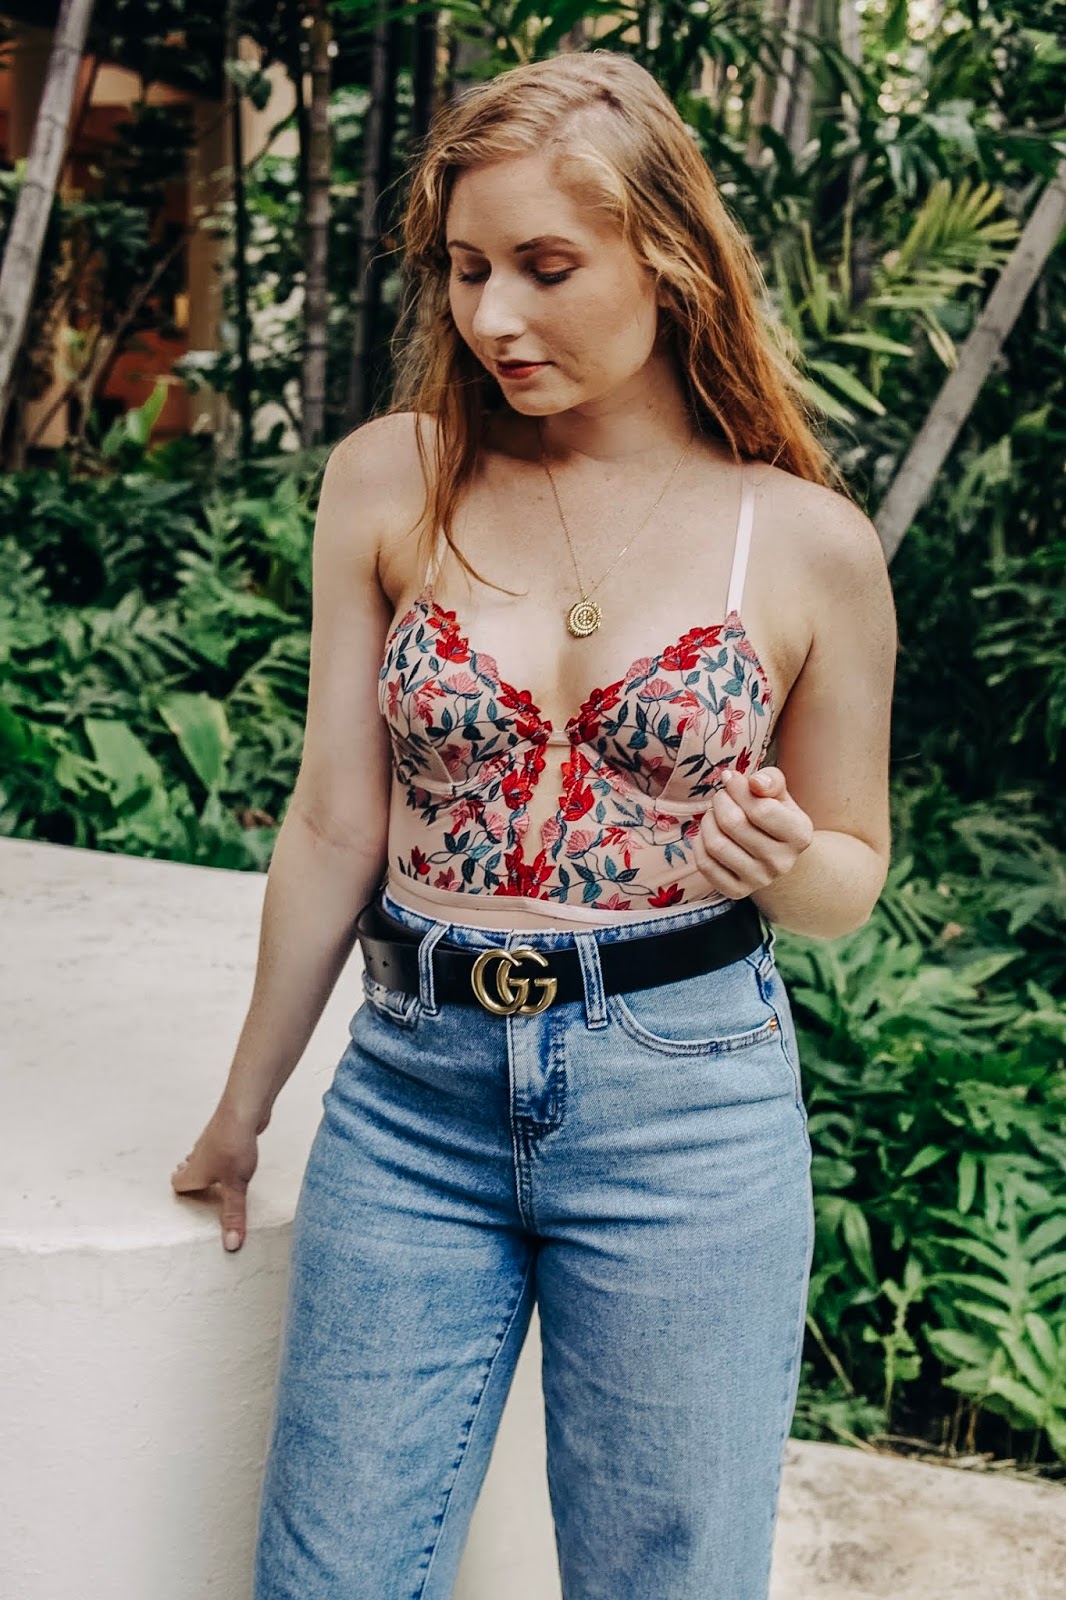 affordable by amanda - 25 things i've learned in 25 years - wearing a floral bodysuit from forever 21